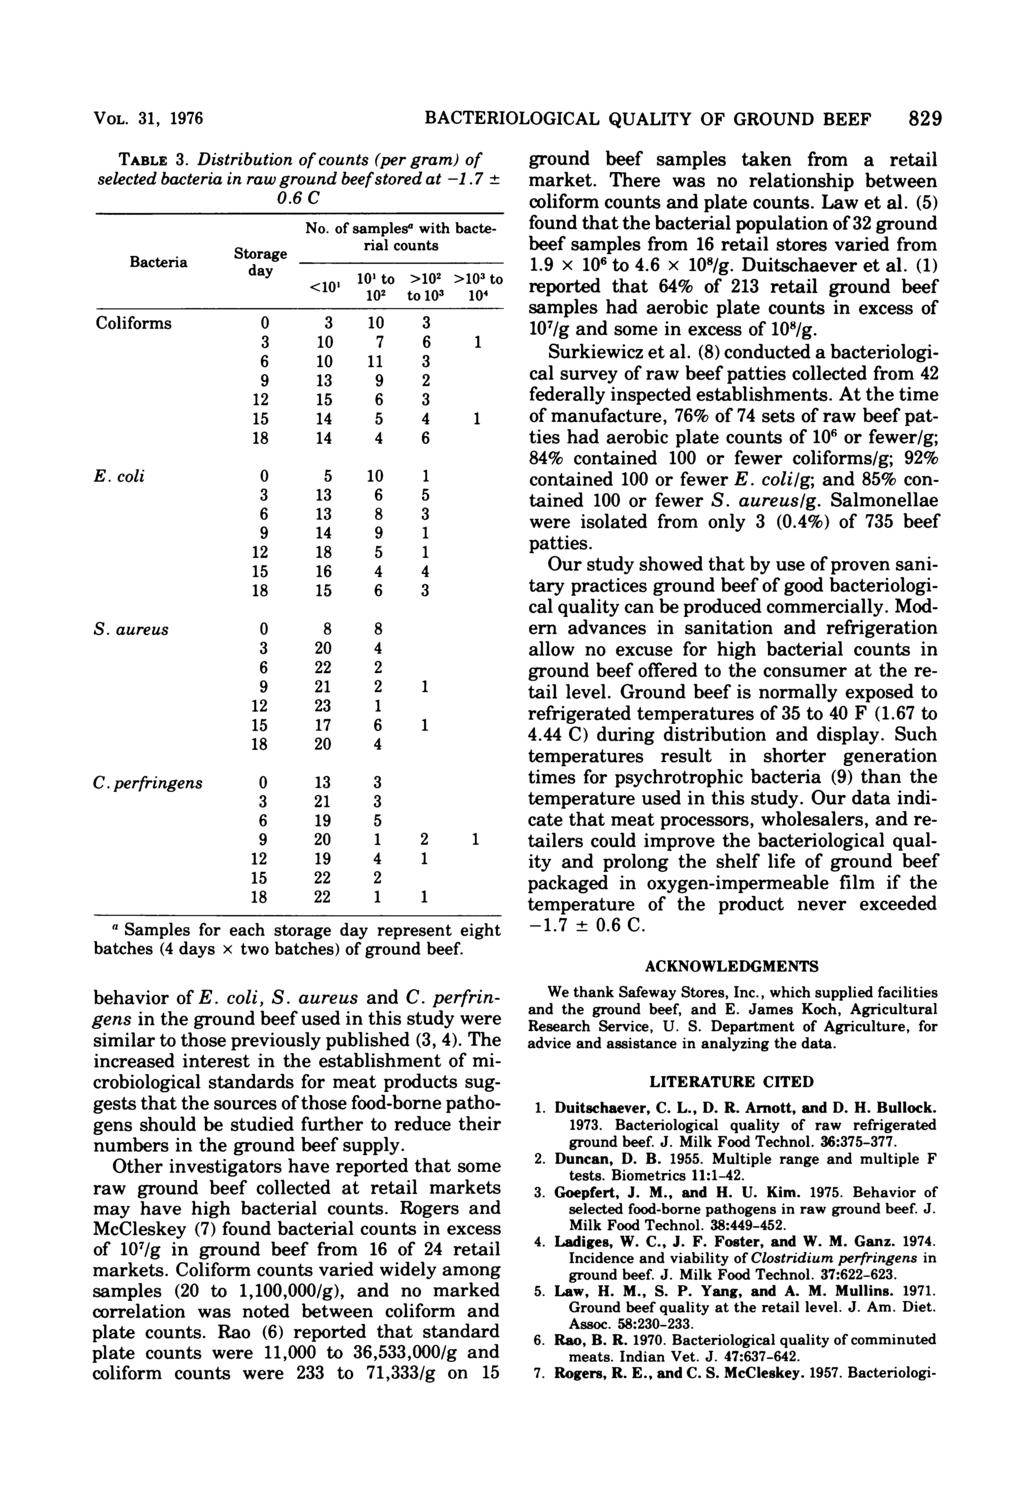 VOL. 31, 1976 TABLE 3. Distribution of counts (per gram) of selected bacteria in raw ground beefstored at -1.7 ± 0.6 C No.